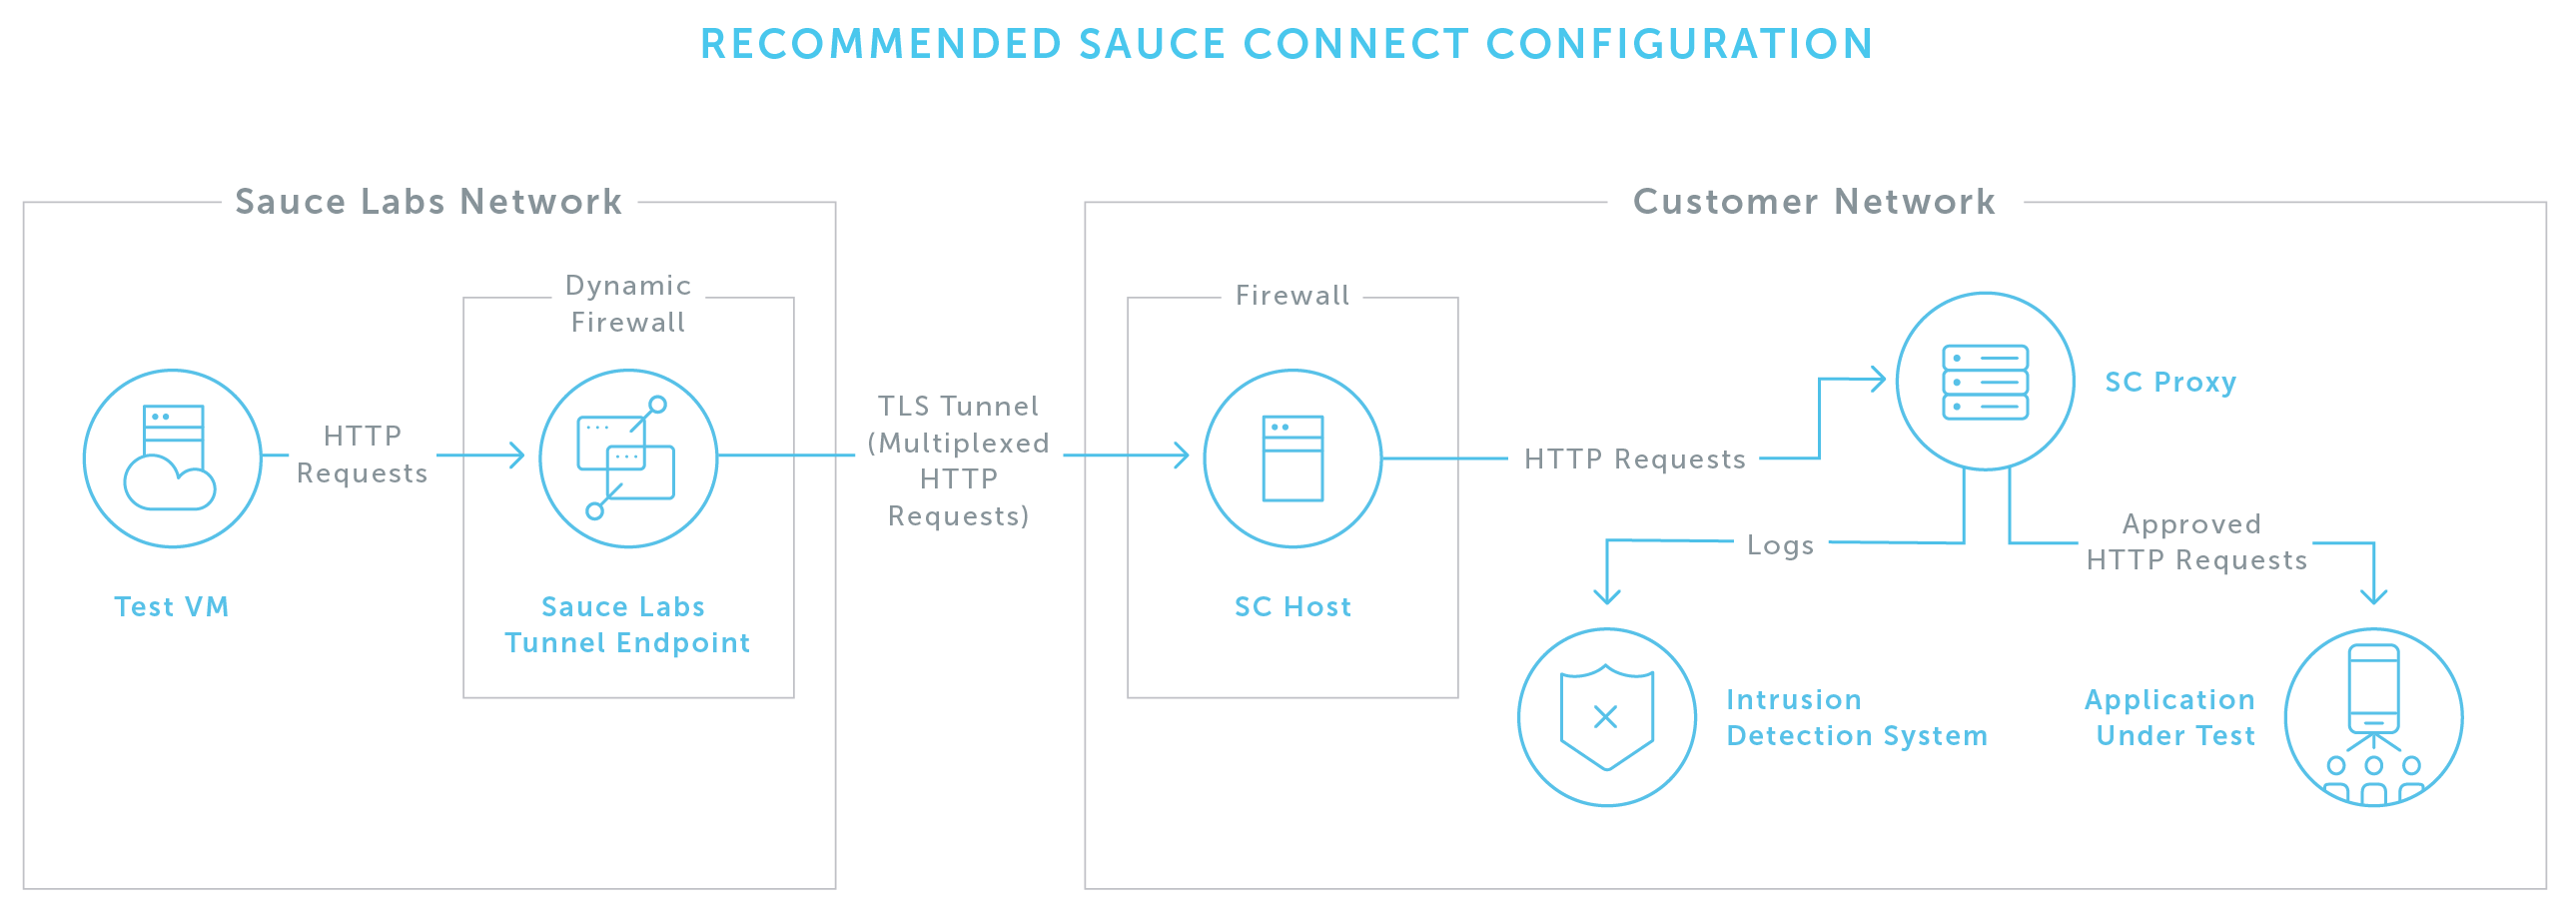 Recommended Sauce Connect Proxy configuration